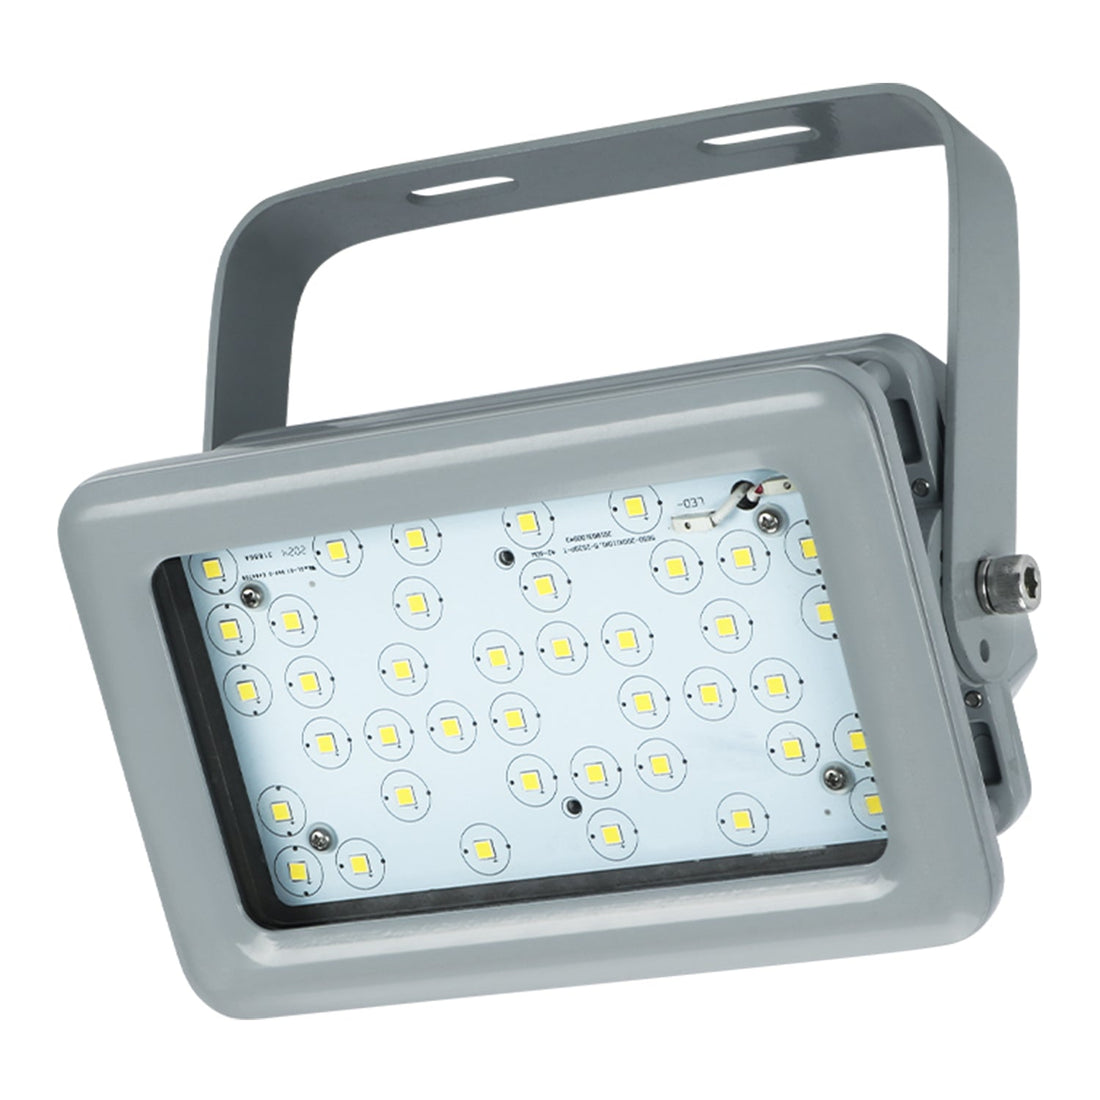 Powerful and Safe Lighting Solution for Hazardous Environments: 300W LED Explosion-Proof Lighting - Dimmable, 5000K, 42000LM, IP66 Rated, Ideal for Oil &amp; Gas Refineries, Drilling Rigs, Petrochemical Facilities